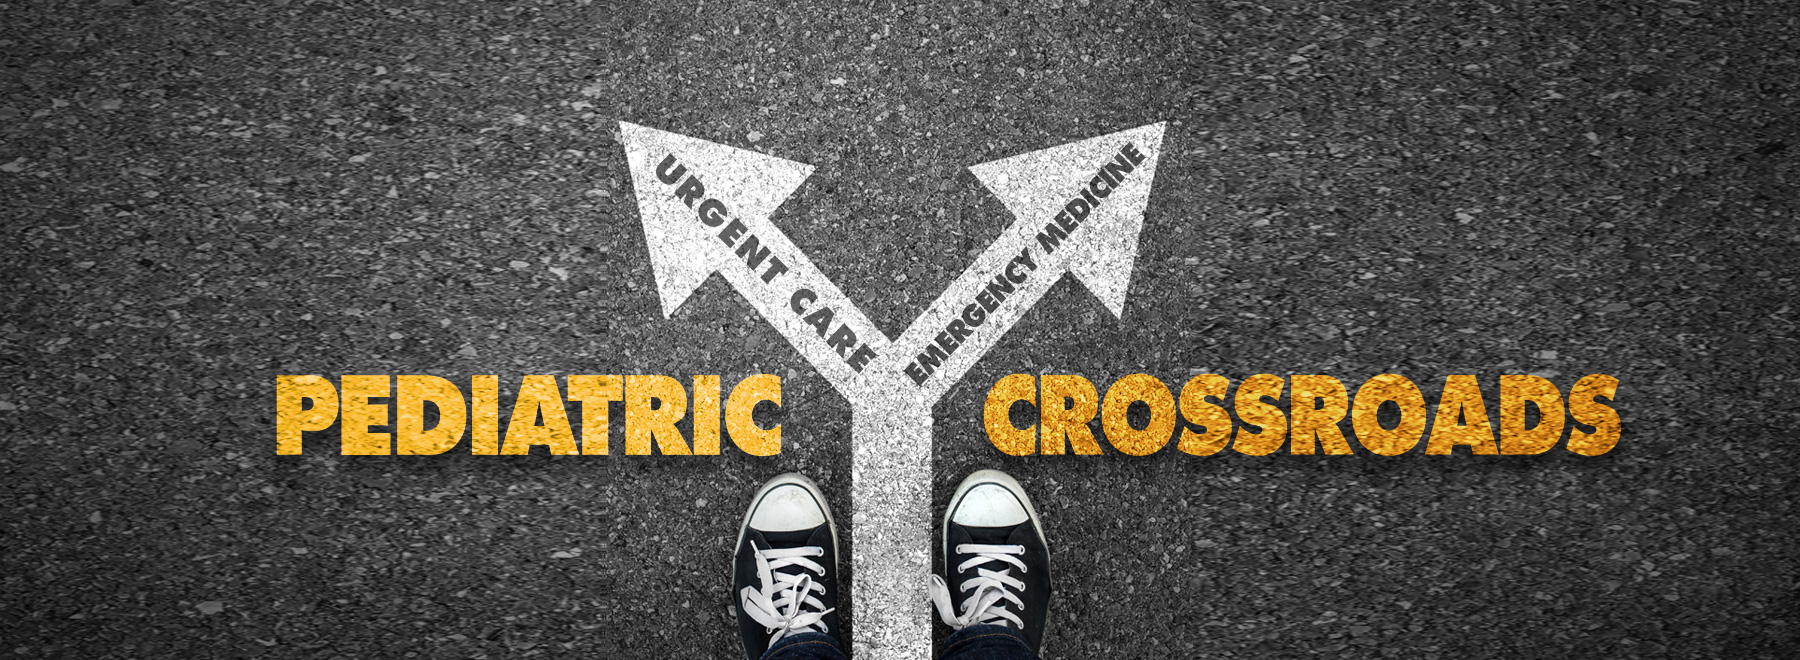 Photo illustration on two black sneakers on asphalt road with painted arrows pointing to Emergency Medicine and Urgent Care